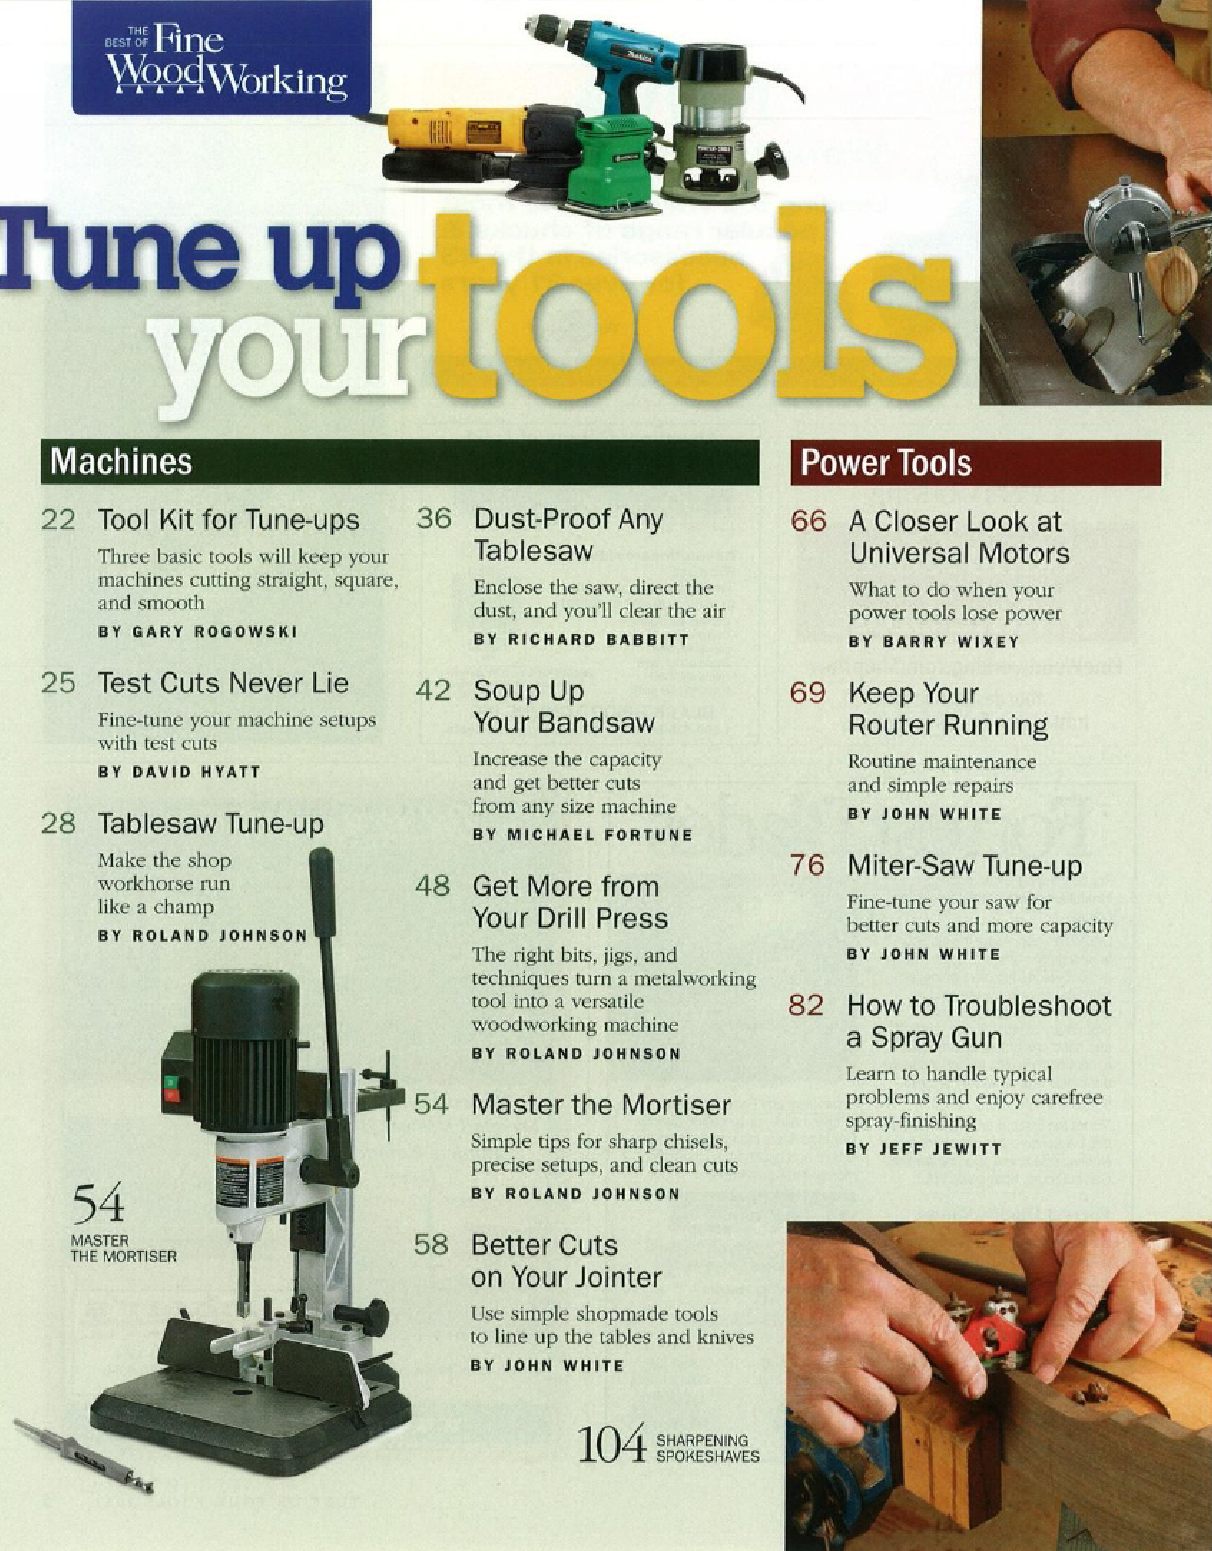 Tune Up Your Tools. Fine Woodworking 2011